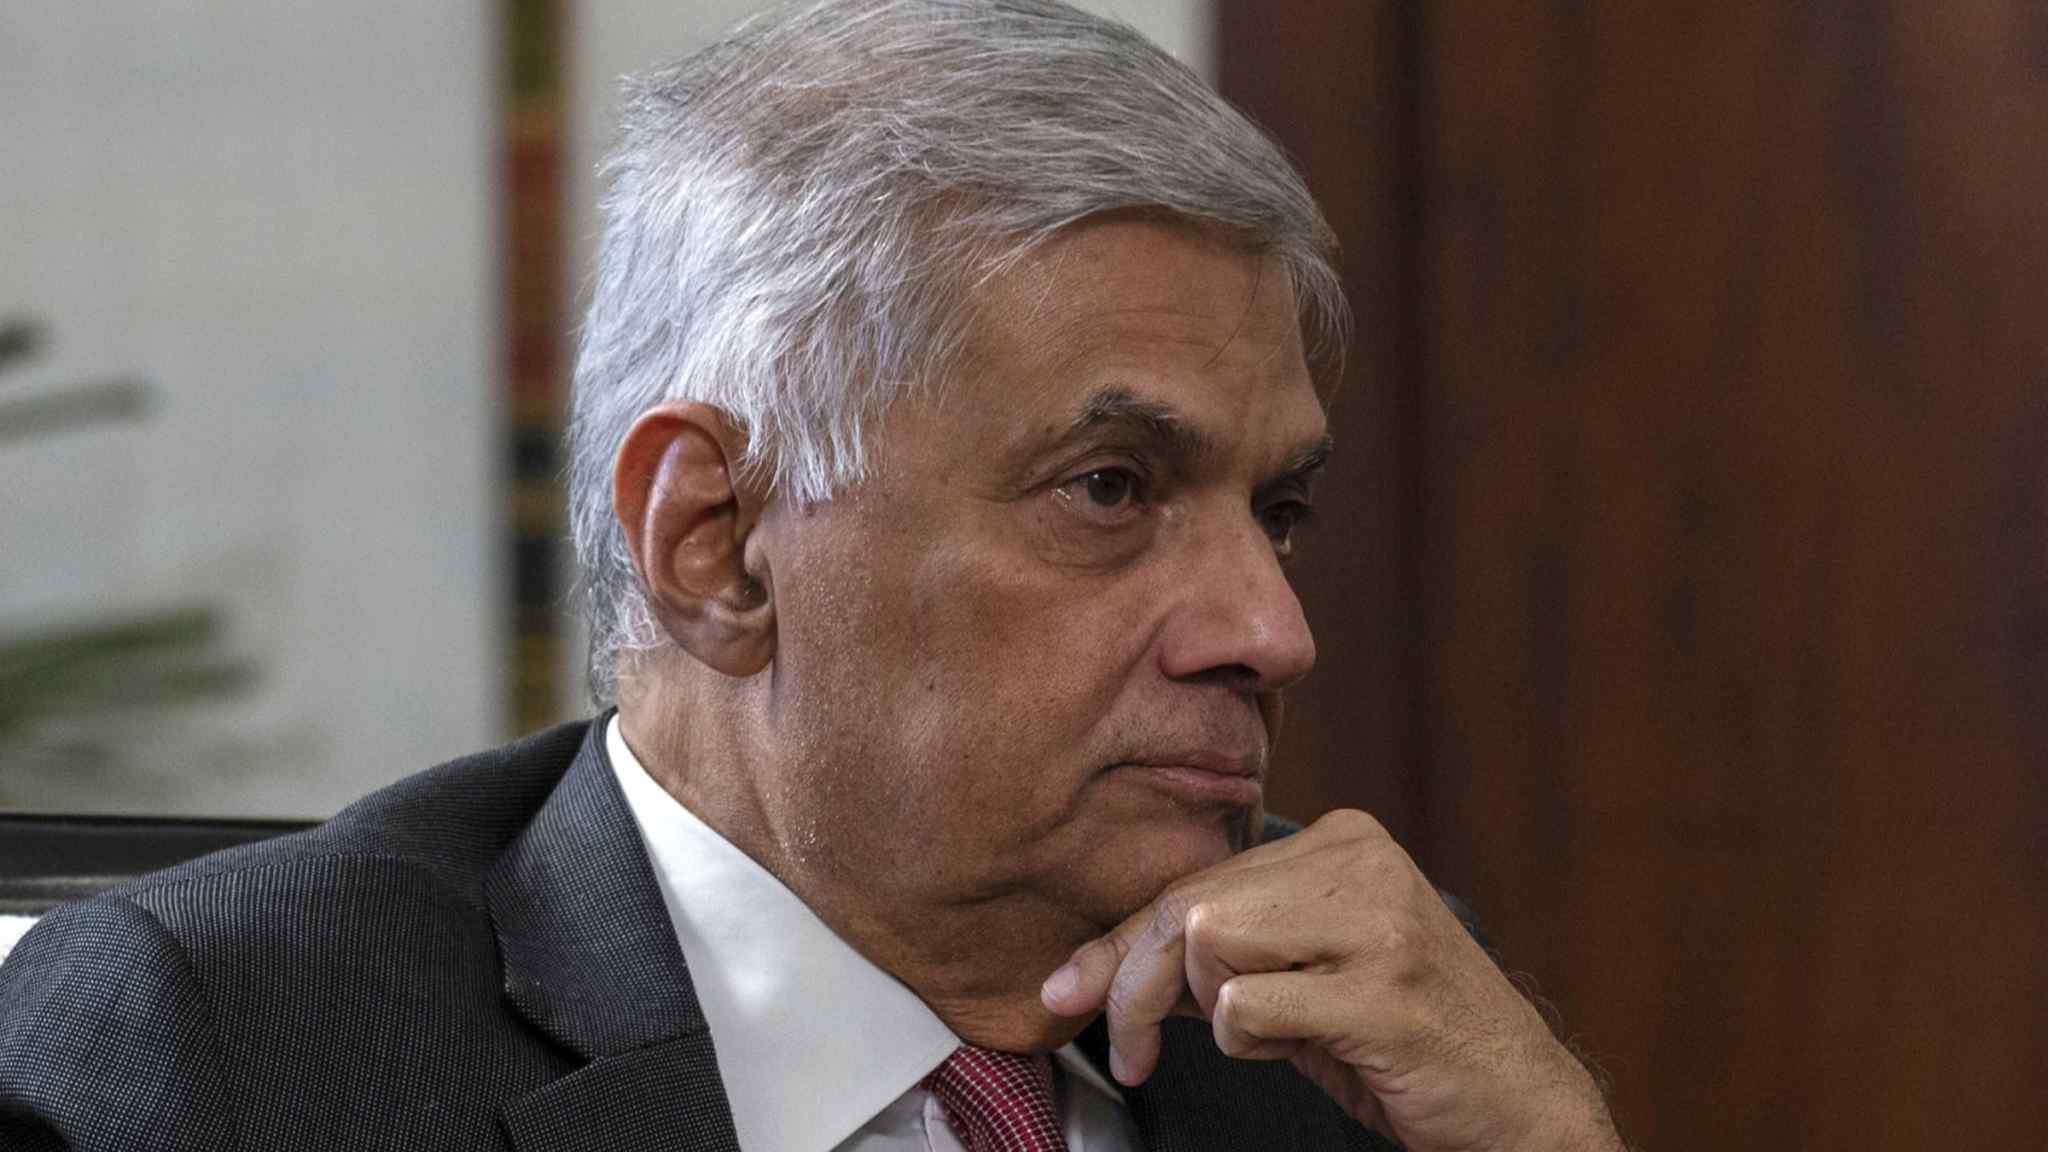 Sri Lanka MPs risk renewed unrest by electing unpopular PM as president